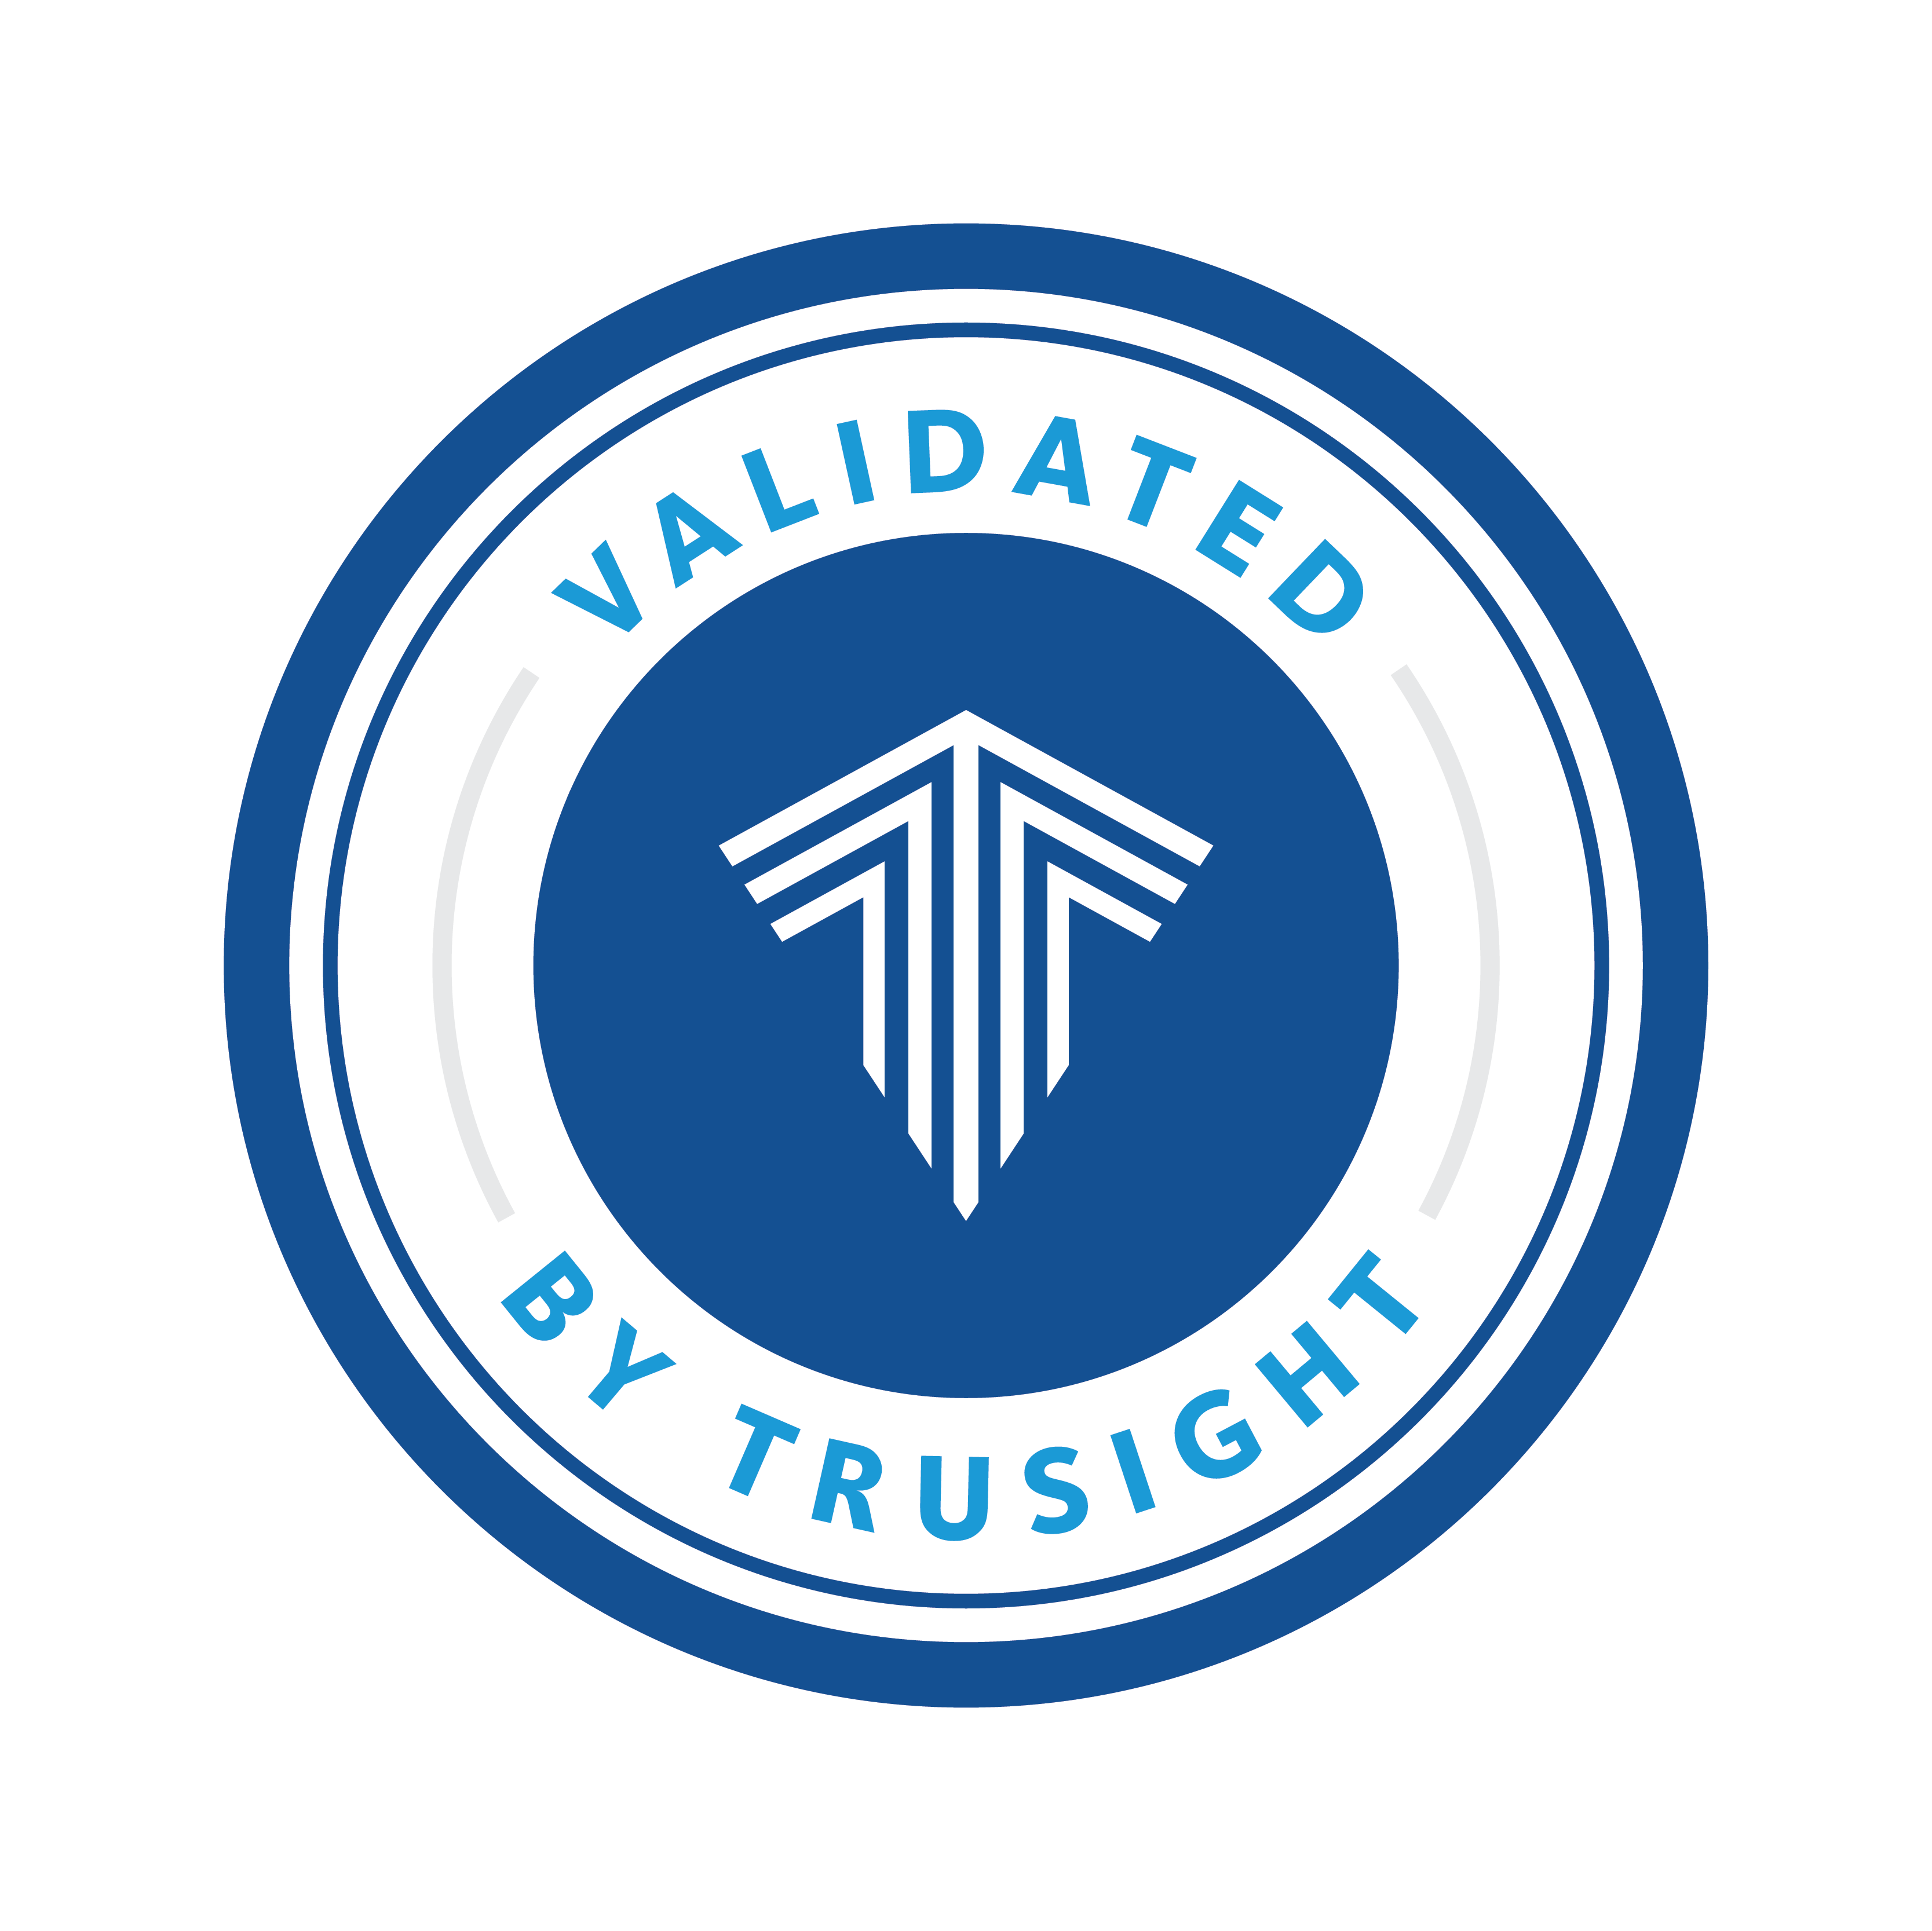 Validated by TruSight graphic FINAL all white bkgd 1